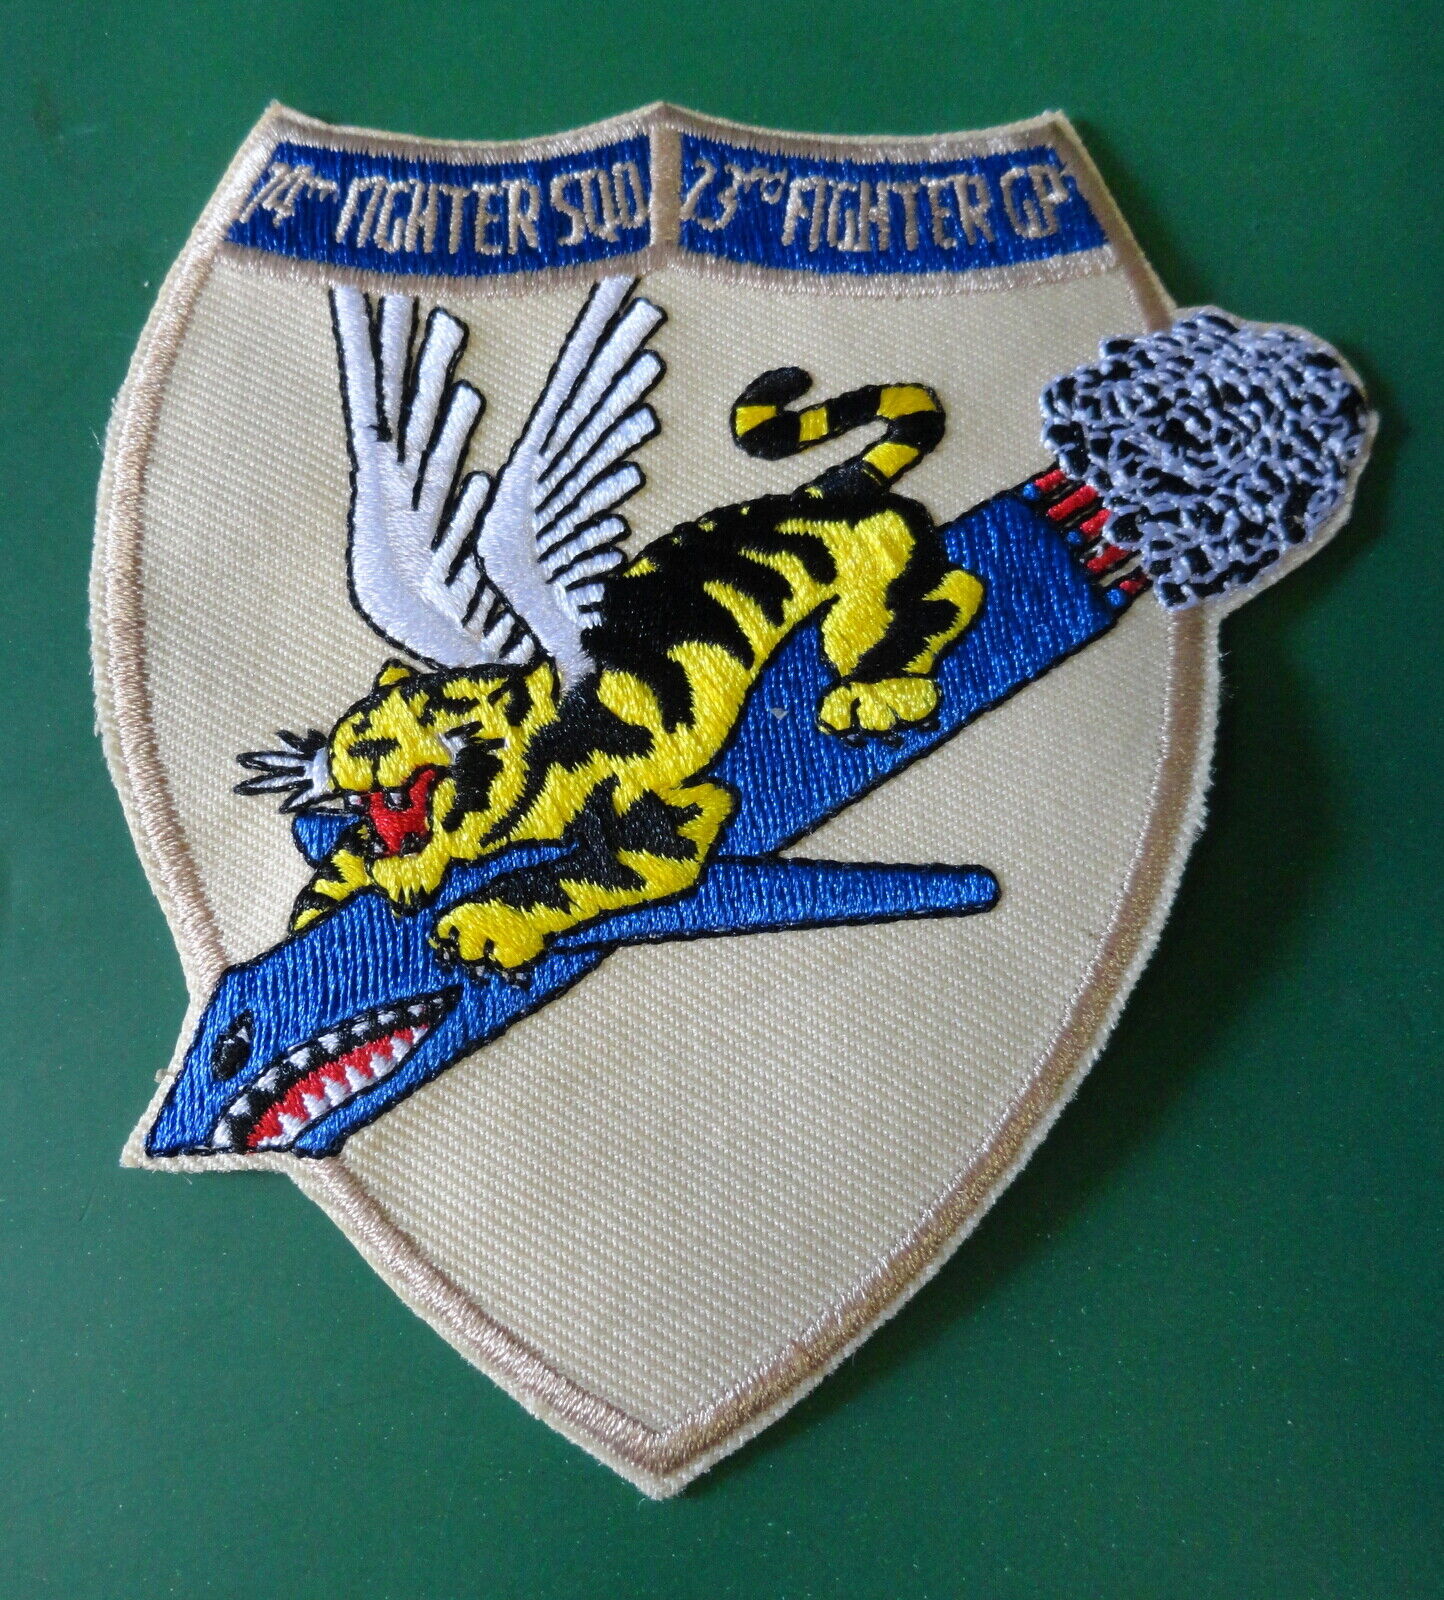 74TH FIGHTER SQUADRON/23RD FIGHTER GROUP BREAST PATCH